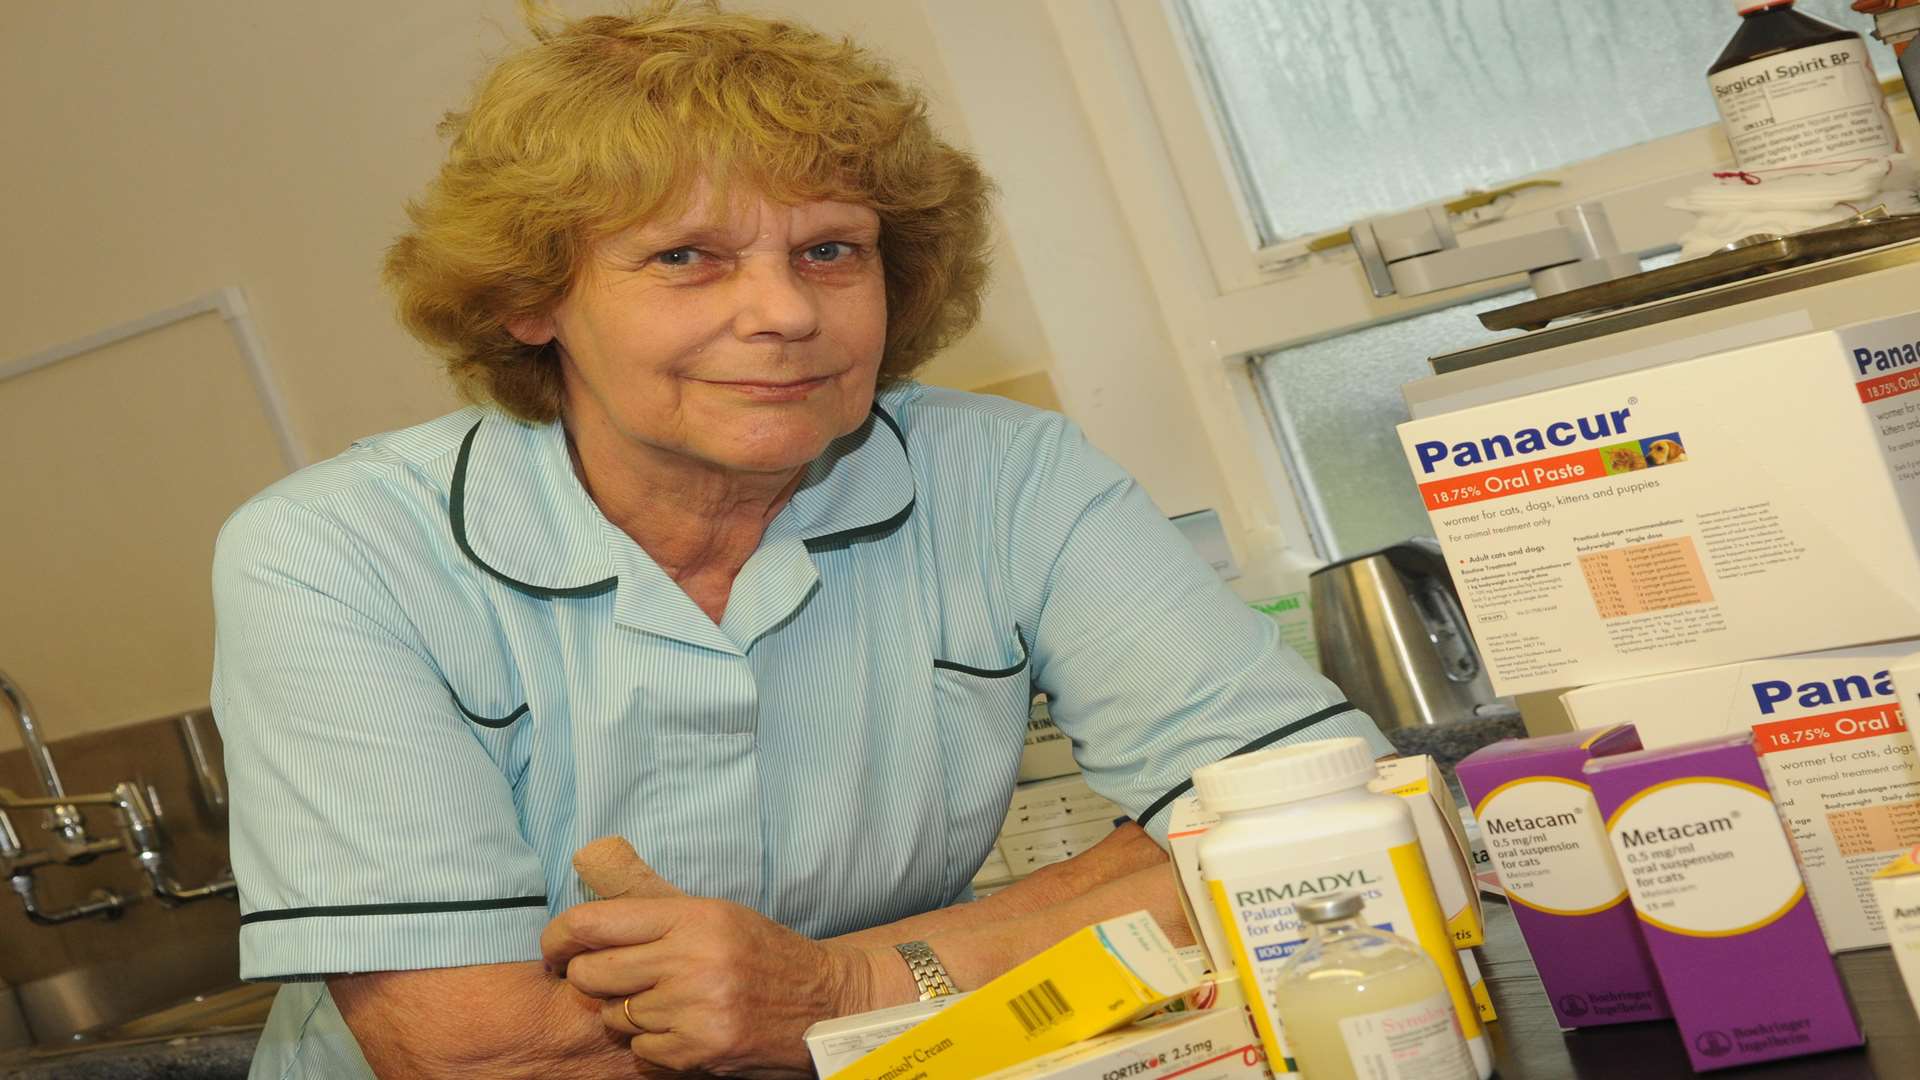 Lord Whisky animal sanctuary owner Margaret Todd at veterinary clinic which has been broken into